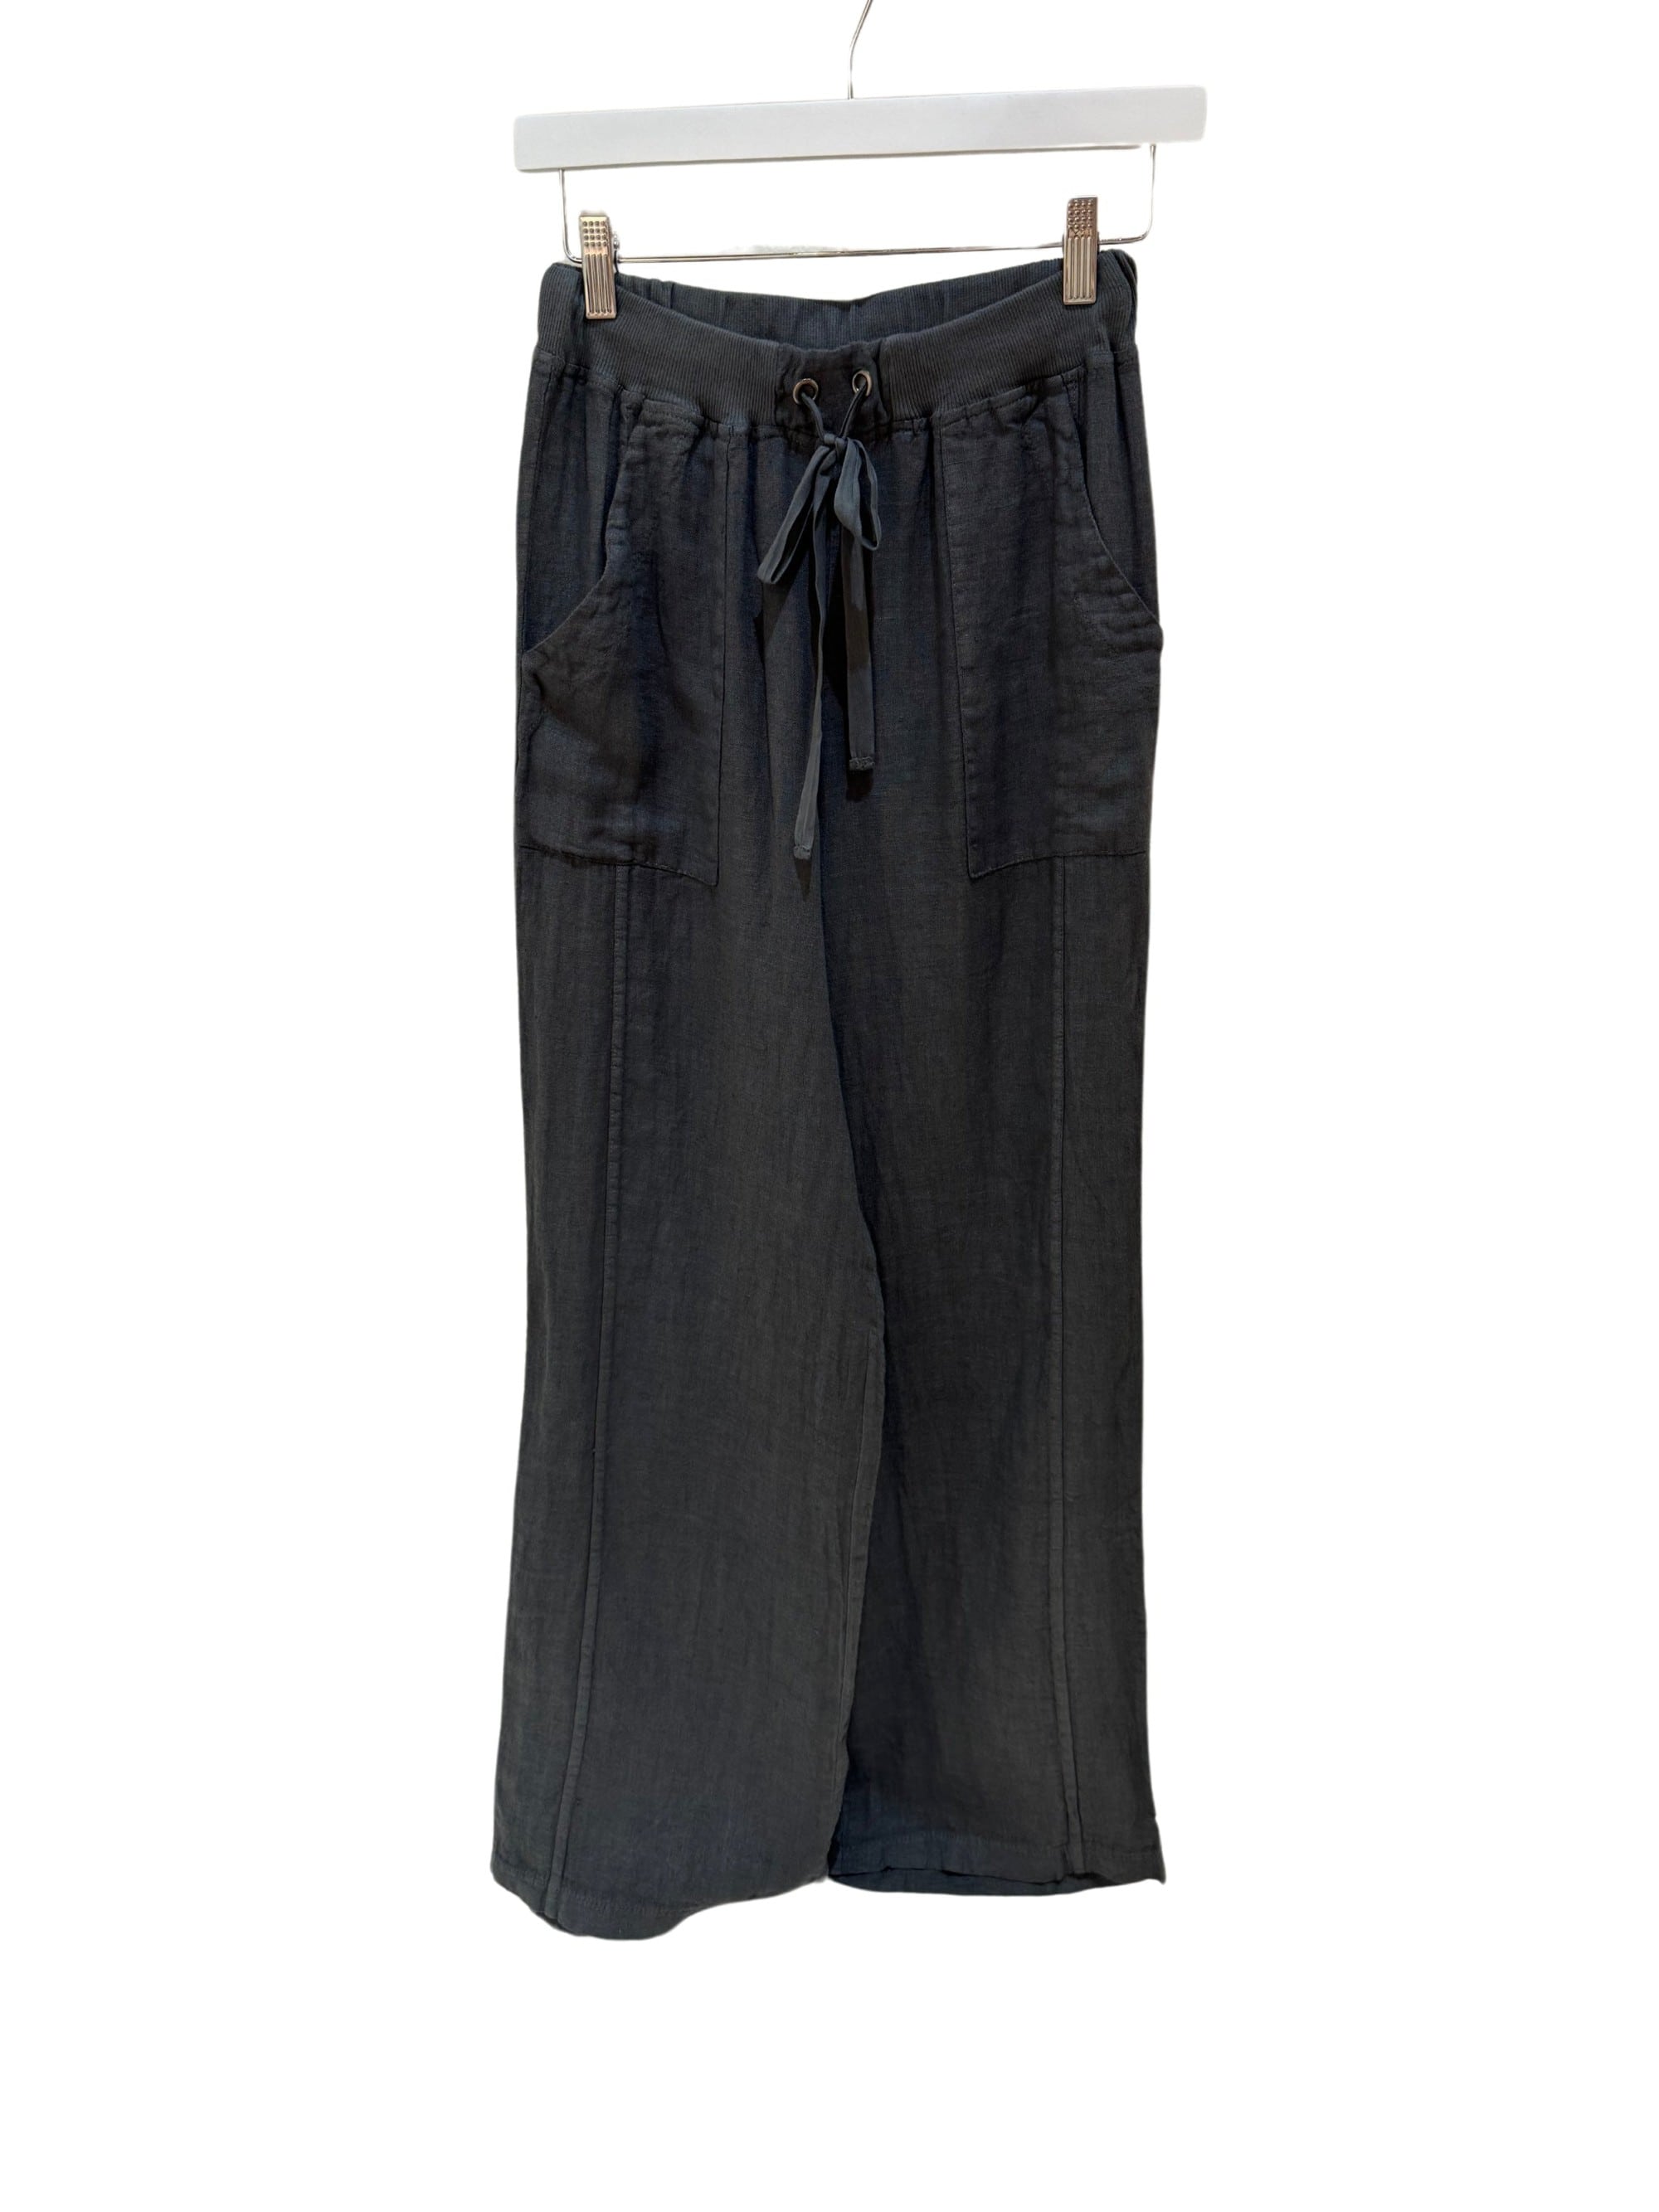 Inizio Drawstring Linen Pants - clever alice